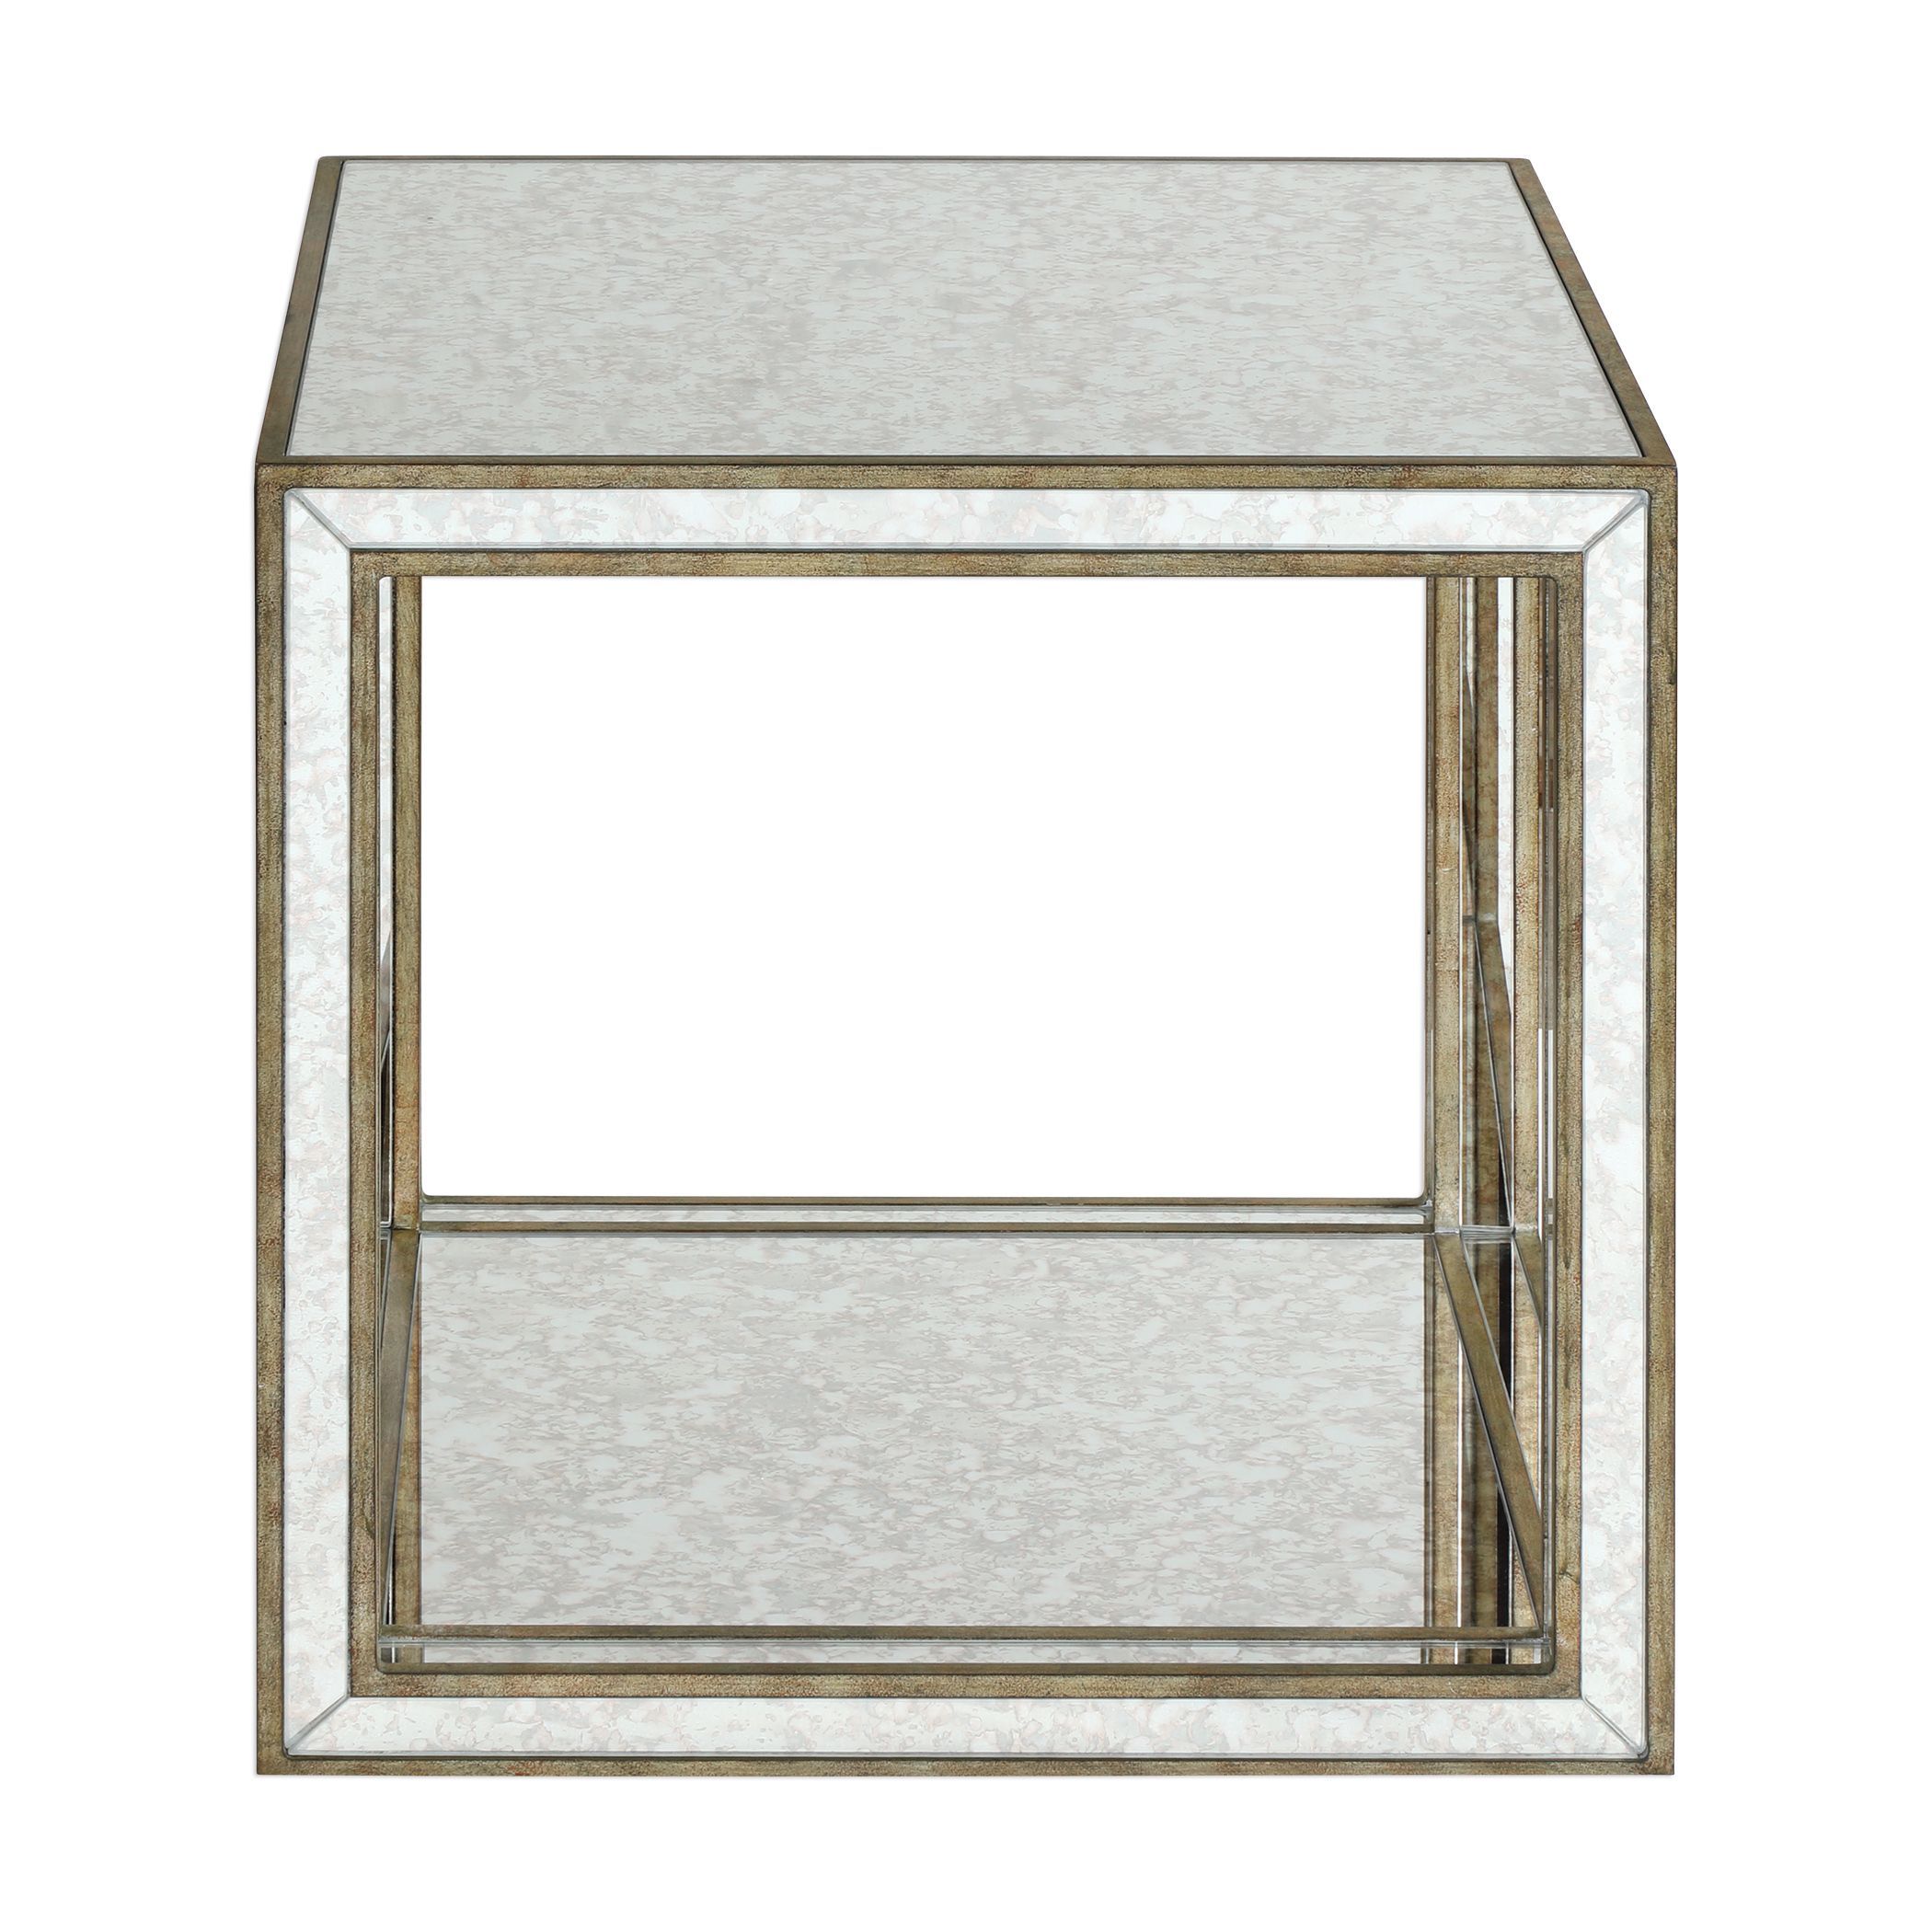 julie contemporary antique mirrored open cube accent table wood uttermost floating console henzler end target threshold teal patio umbrella hole insert concrete garden the company